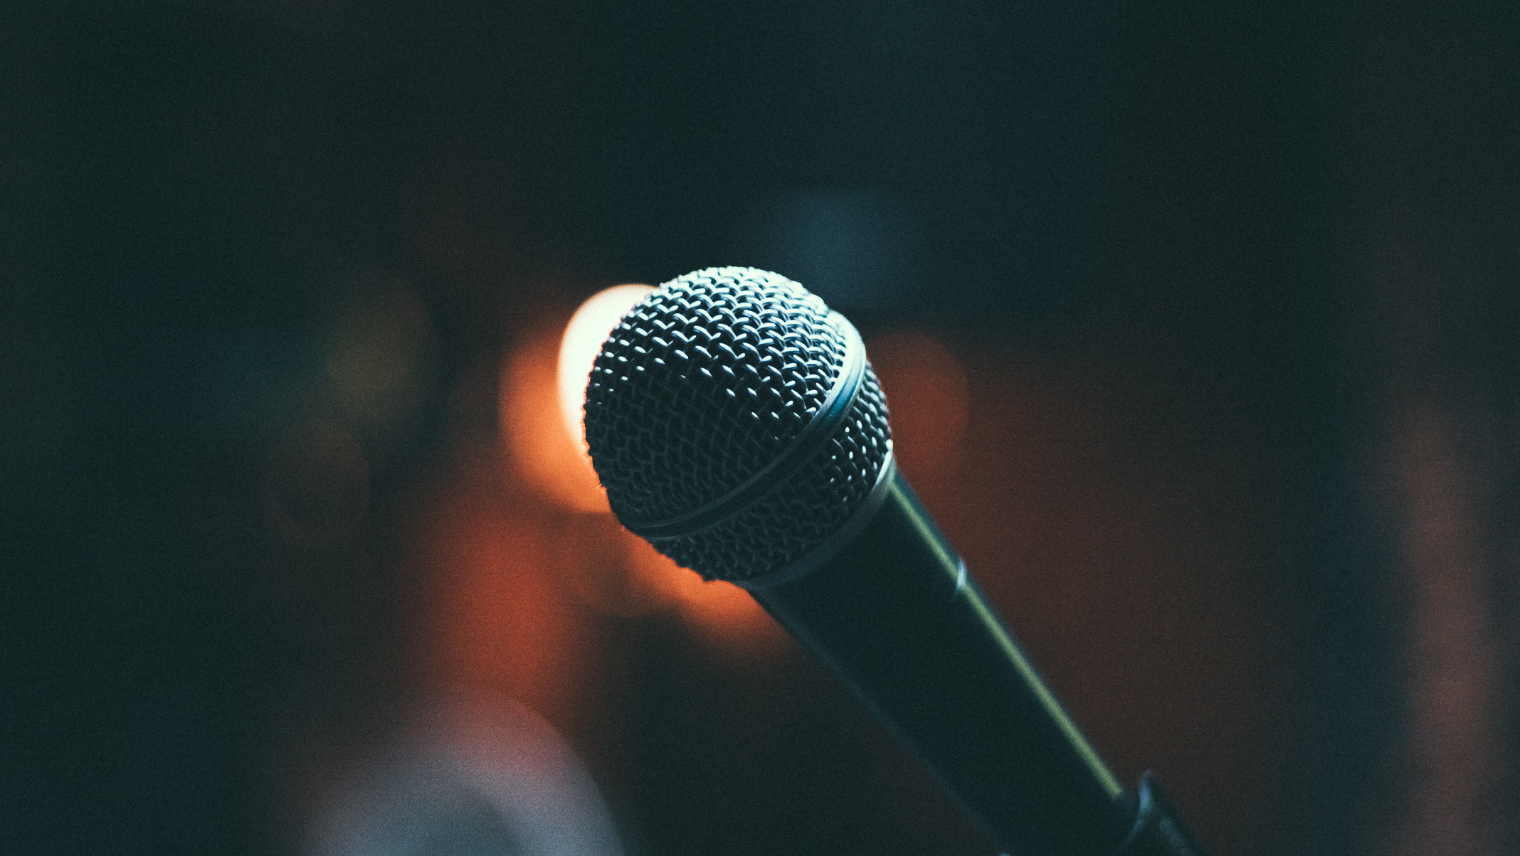 A close up image of a microphone 